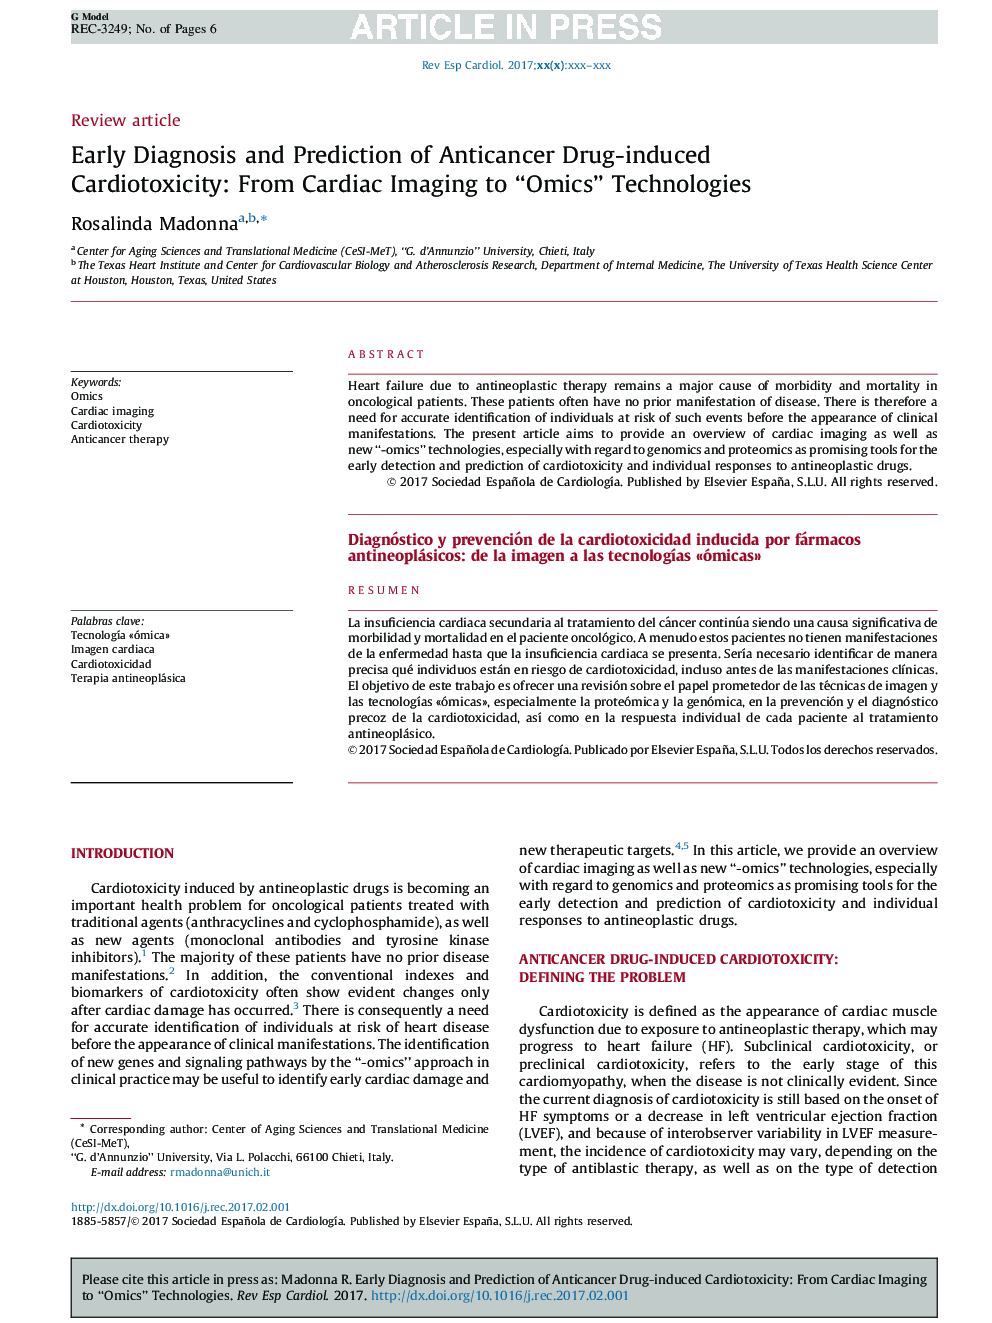 Early Diagnosis and Prediction of Anticancer Drug-induced Cardiotoxicity: From Cardiac Imaging to “Omics” Technologies